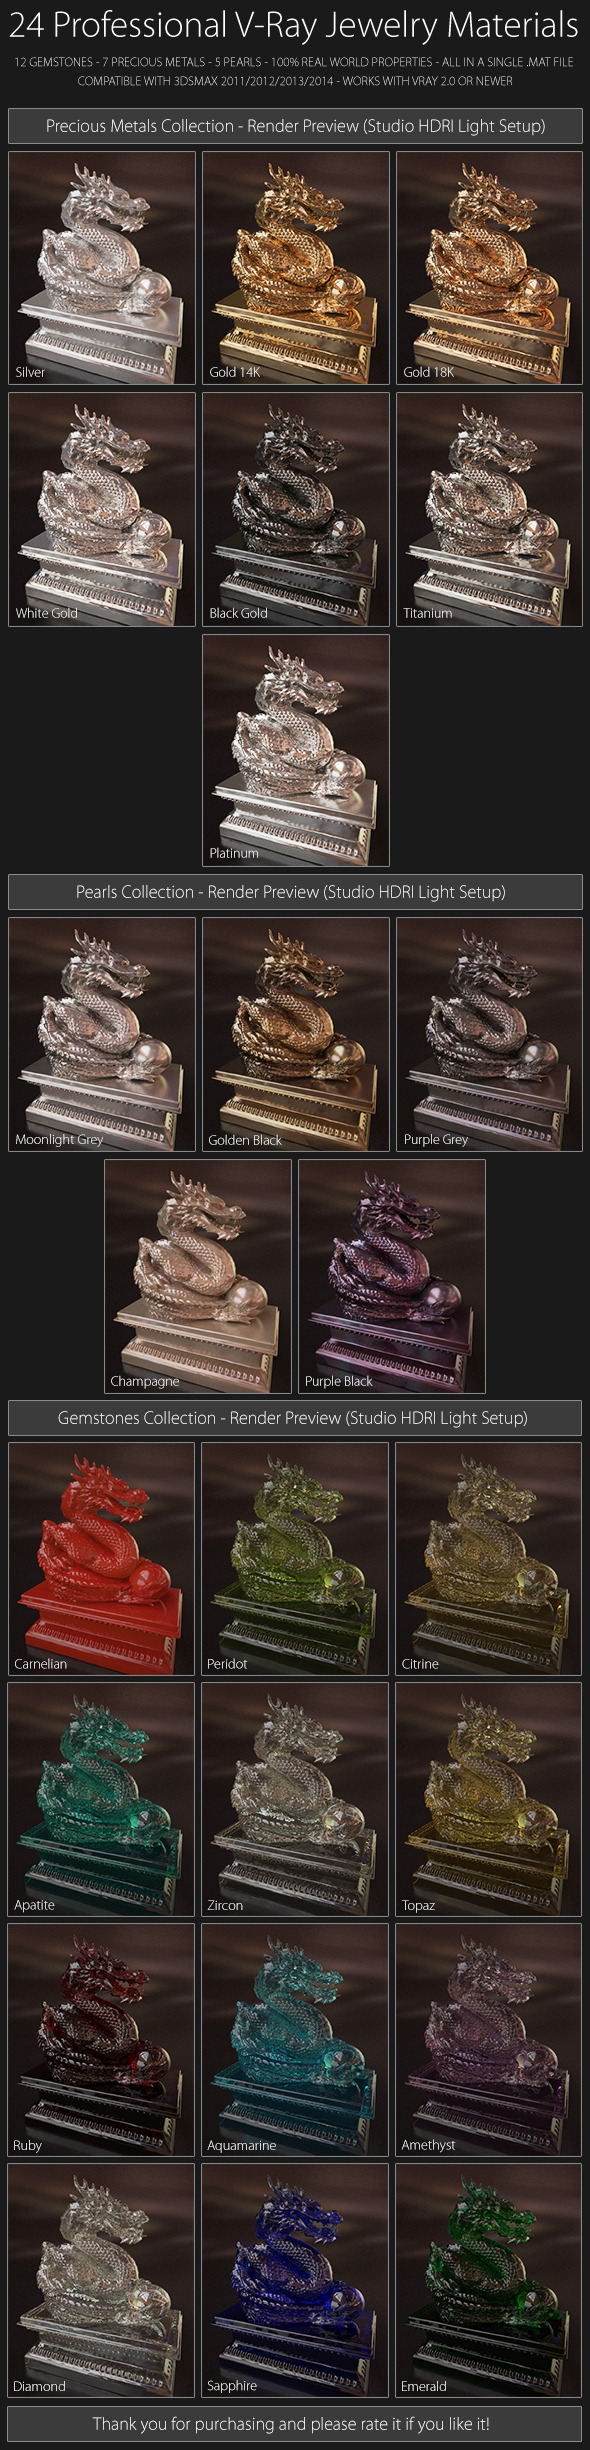 24 Professional V-Ray Jewelry Materials